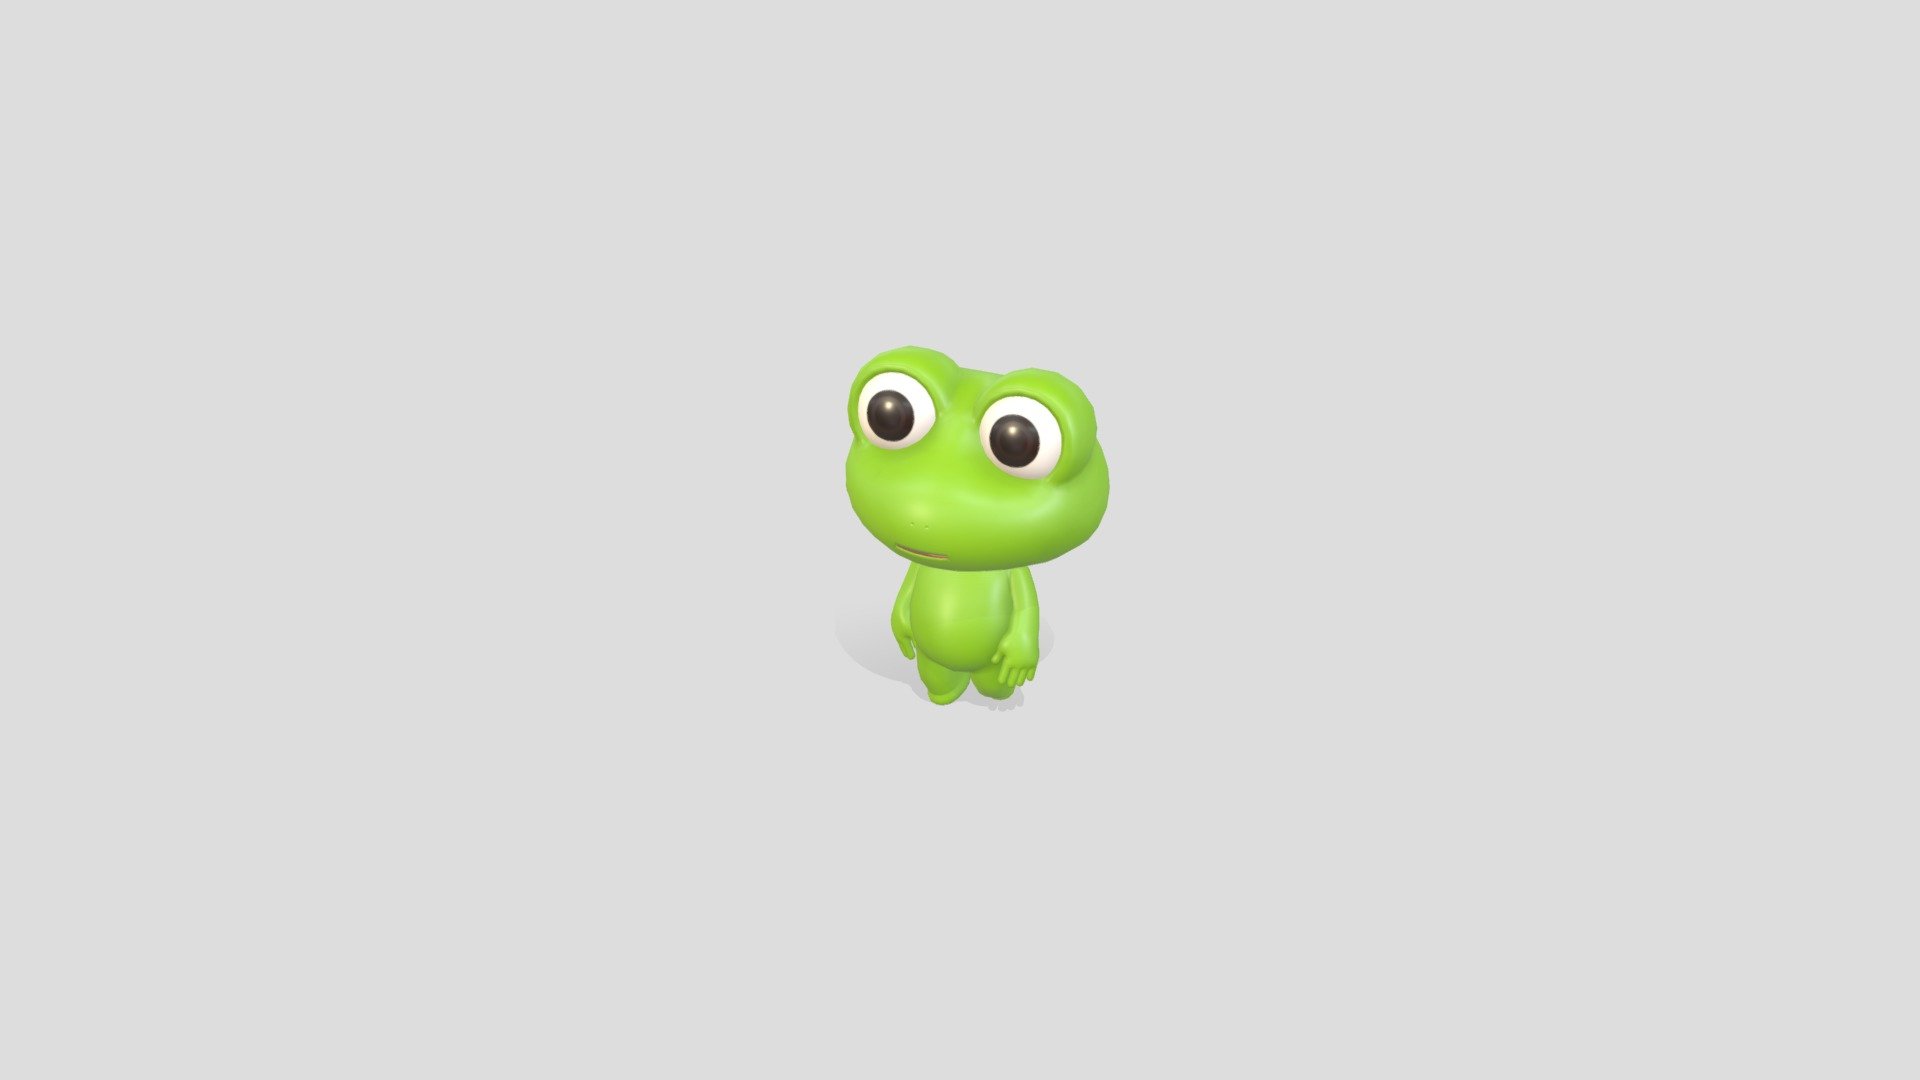 Rigged Frog character 3d model.      
    


File Format      
 
- 3ds max 2021  
 
- FBX  
 
- OBJ  
    


Clean topology    

Rig with CAT in 3ds Max                          

Bone and Weight skin are in fbx file                 

No Facial Rig               

No Animation               

Non-overlapping unwrapped UVs        
 


PNG texture               

2048x2048                


- Base Color                        

- Roughness                         



4,036 polygons                          

3,874 vertexs                          
 - Character172 Rigged Frog - Buy Royalty Free 3D model by BaluCG 3d model